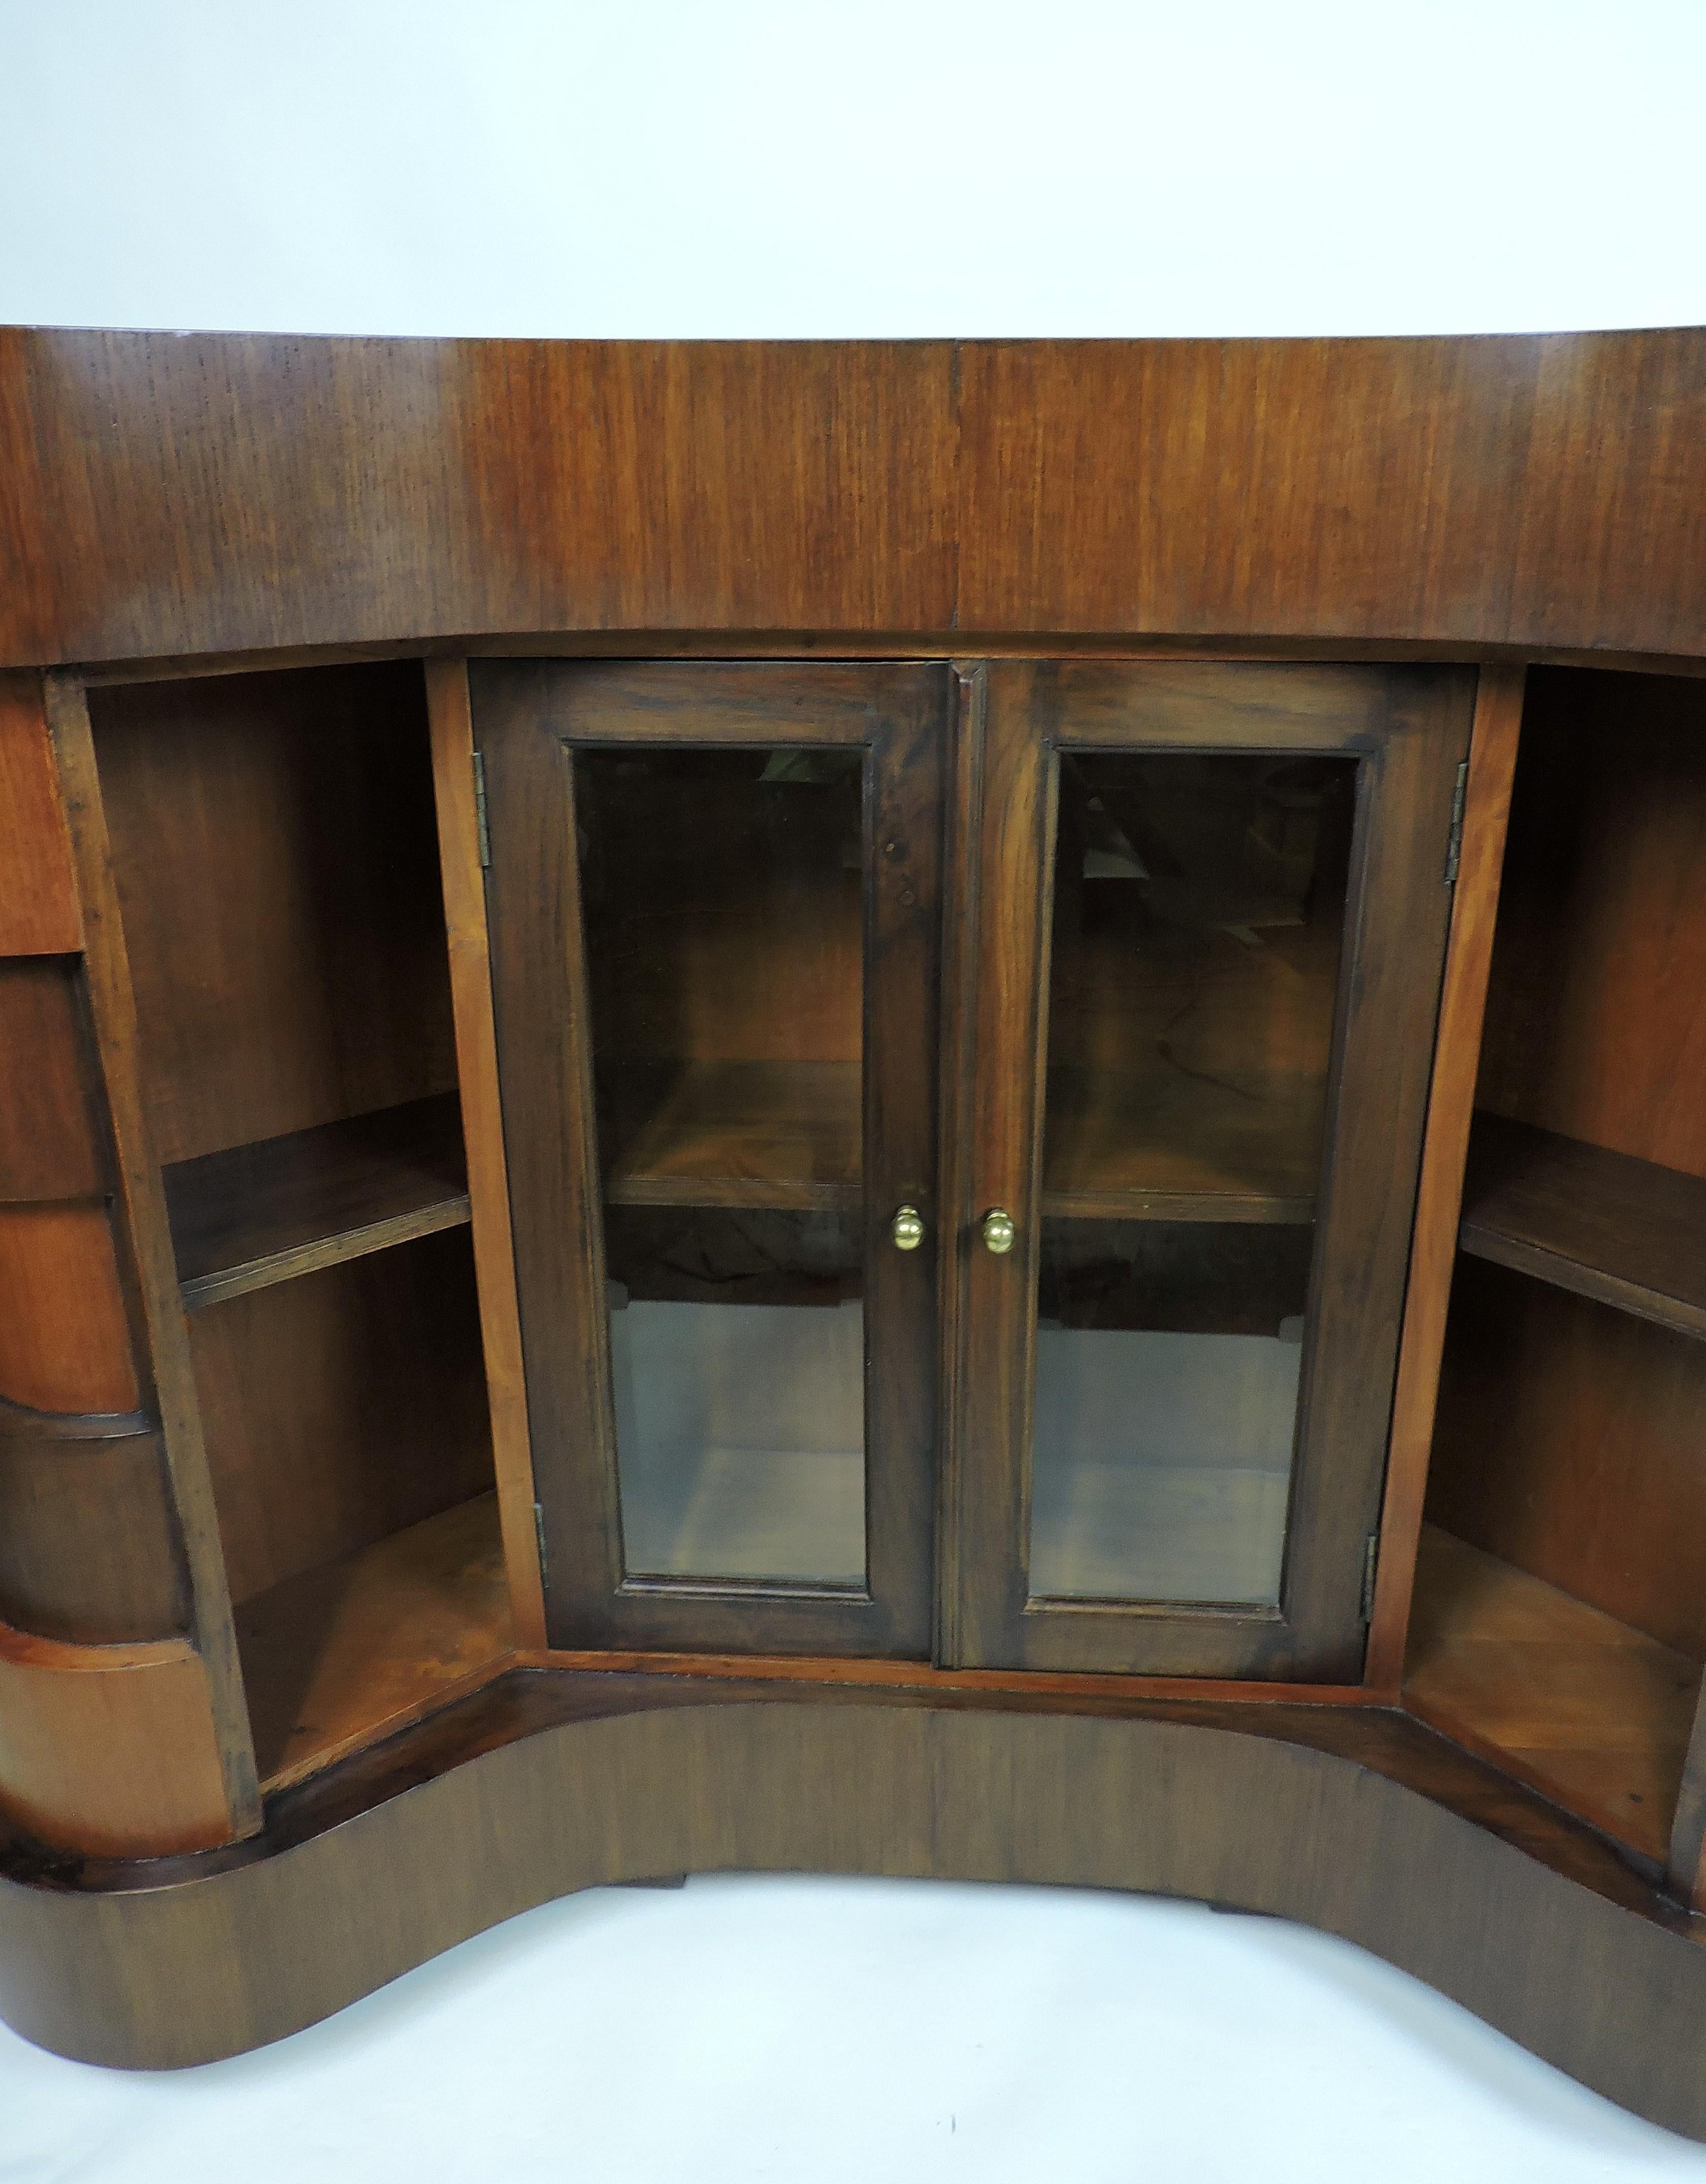 Wood Art Deco or Mid-Century Modern Curved and Wavy Stacked Biomorphic Dry Bar